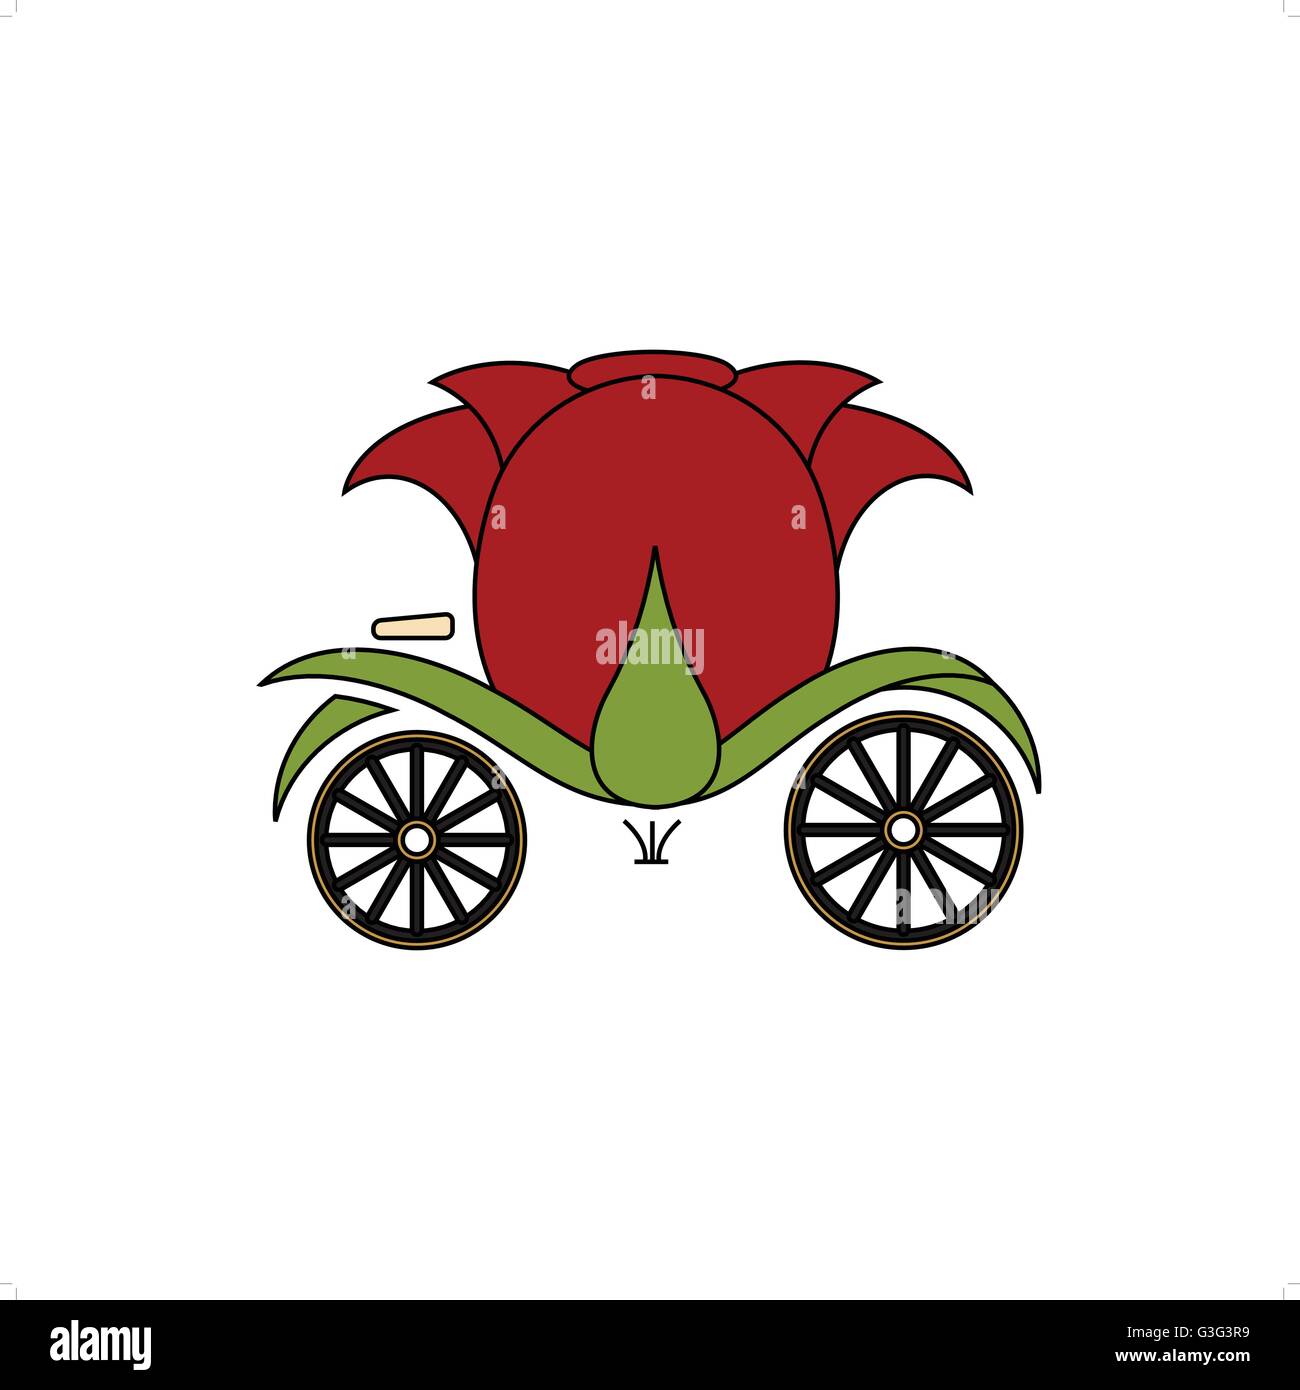 Beautifull rose flower like carriages vector illustration isolated on white background. Stock Vector